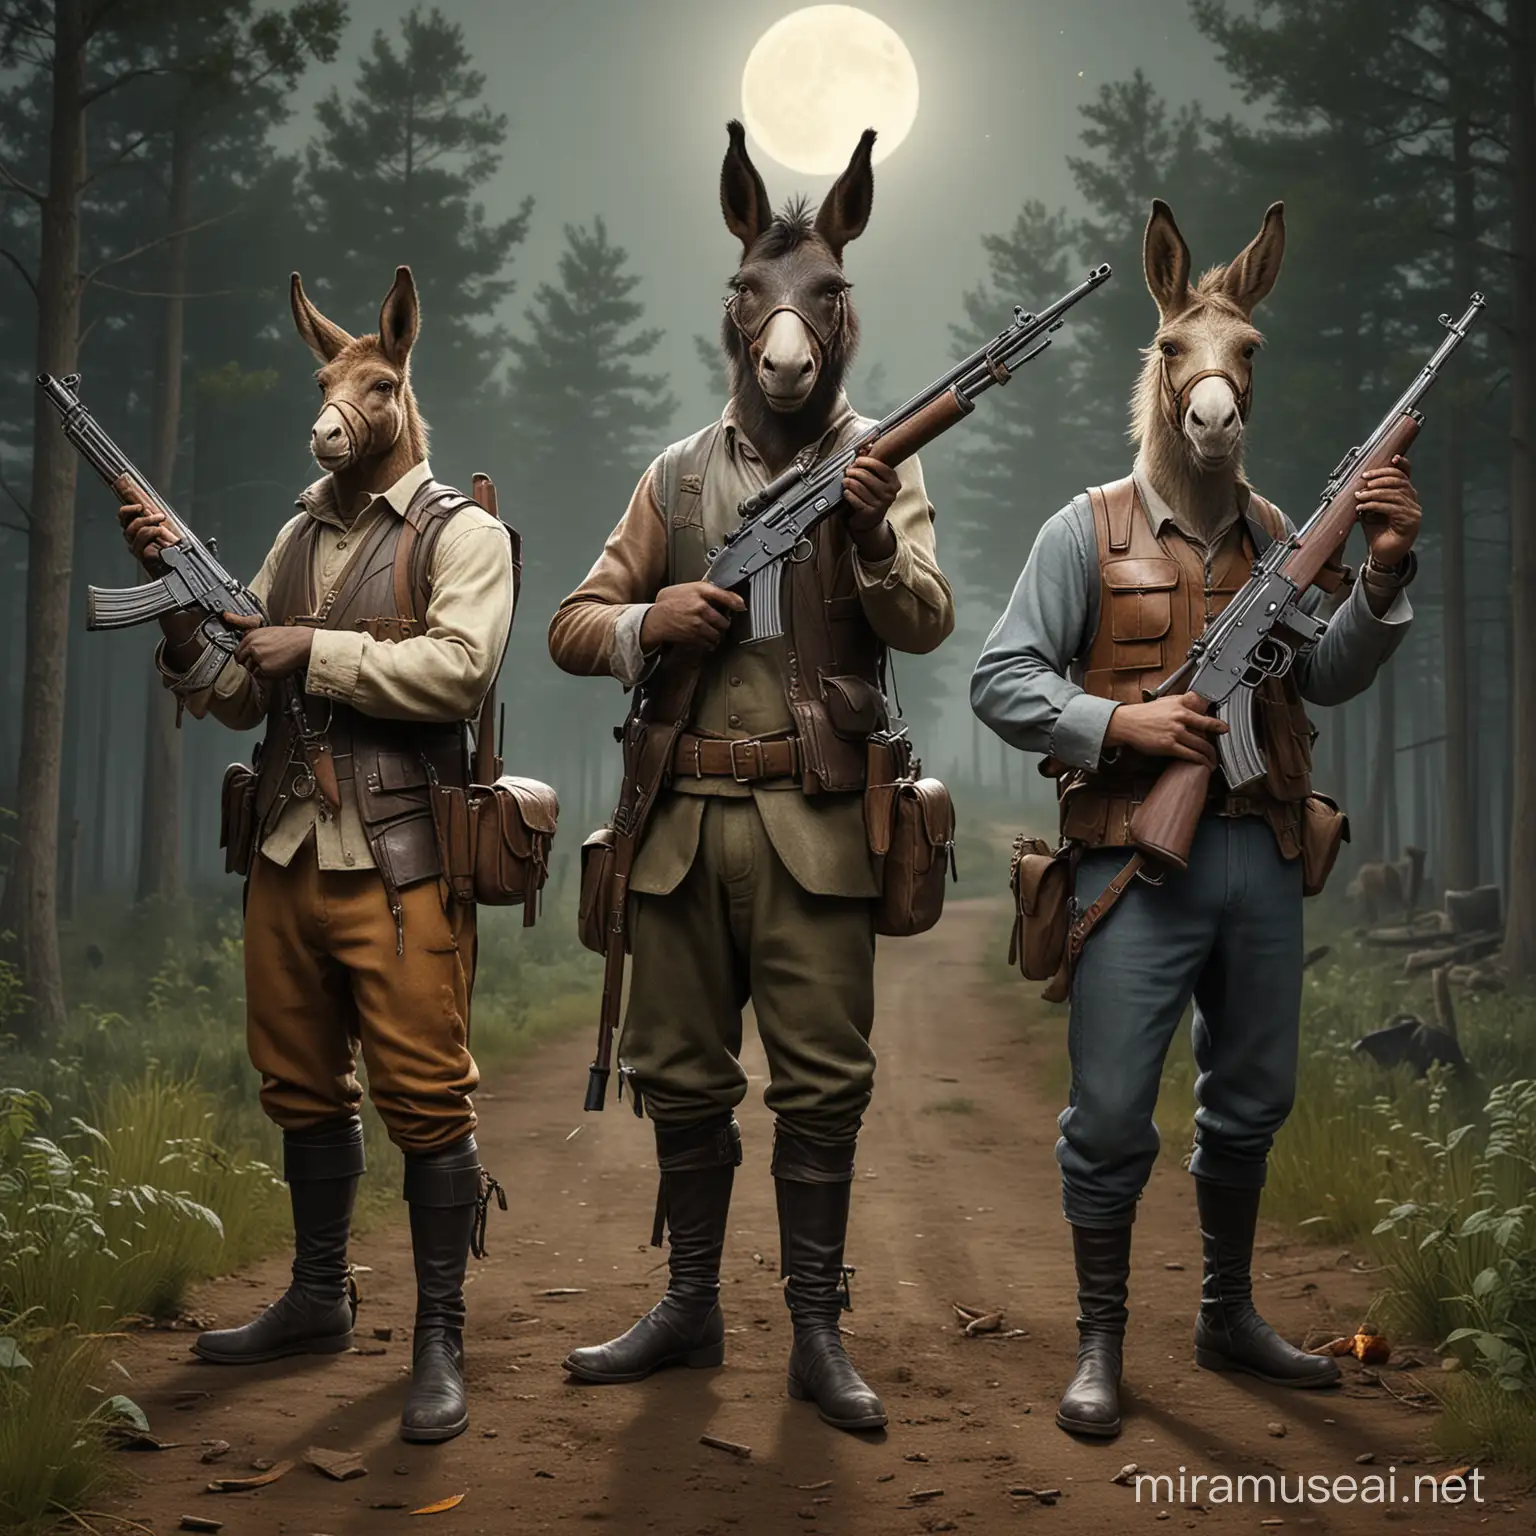 Create a photorealistic image of the Bremen Town Musicians with guns. The dog should be holding a shotgun, the cat should be holding a machine gun, the donkey should be holding a shotgun and the rooster should be holding a shotgun. The animals should be standing in a forest clearing, and there should be a full moon in the background.